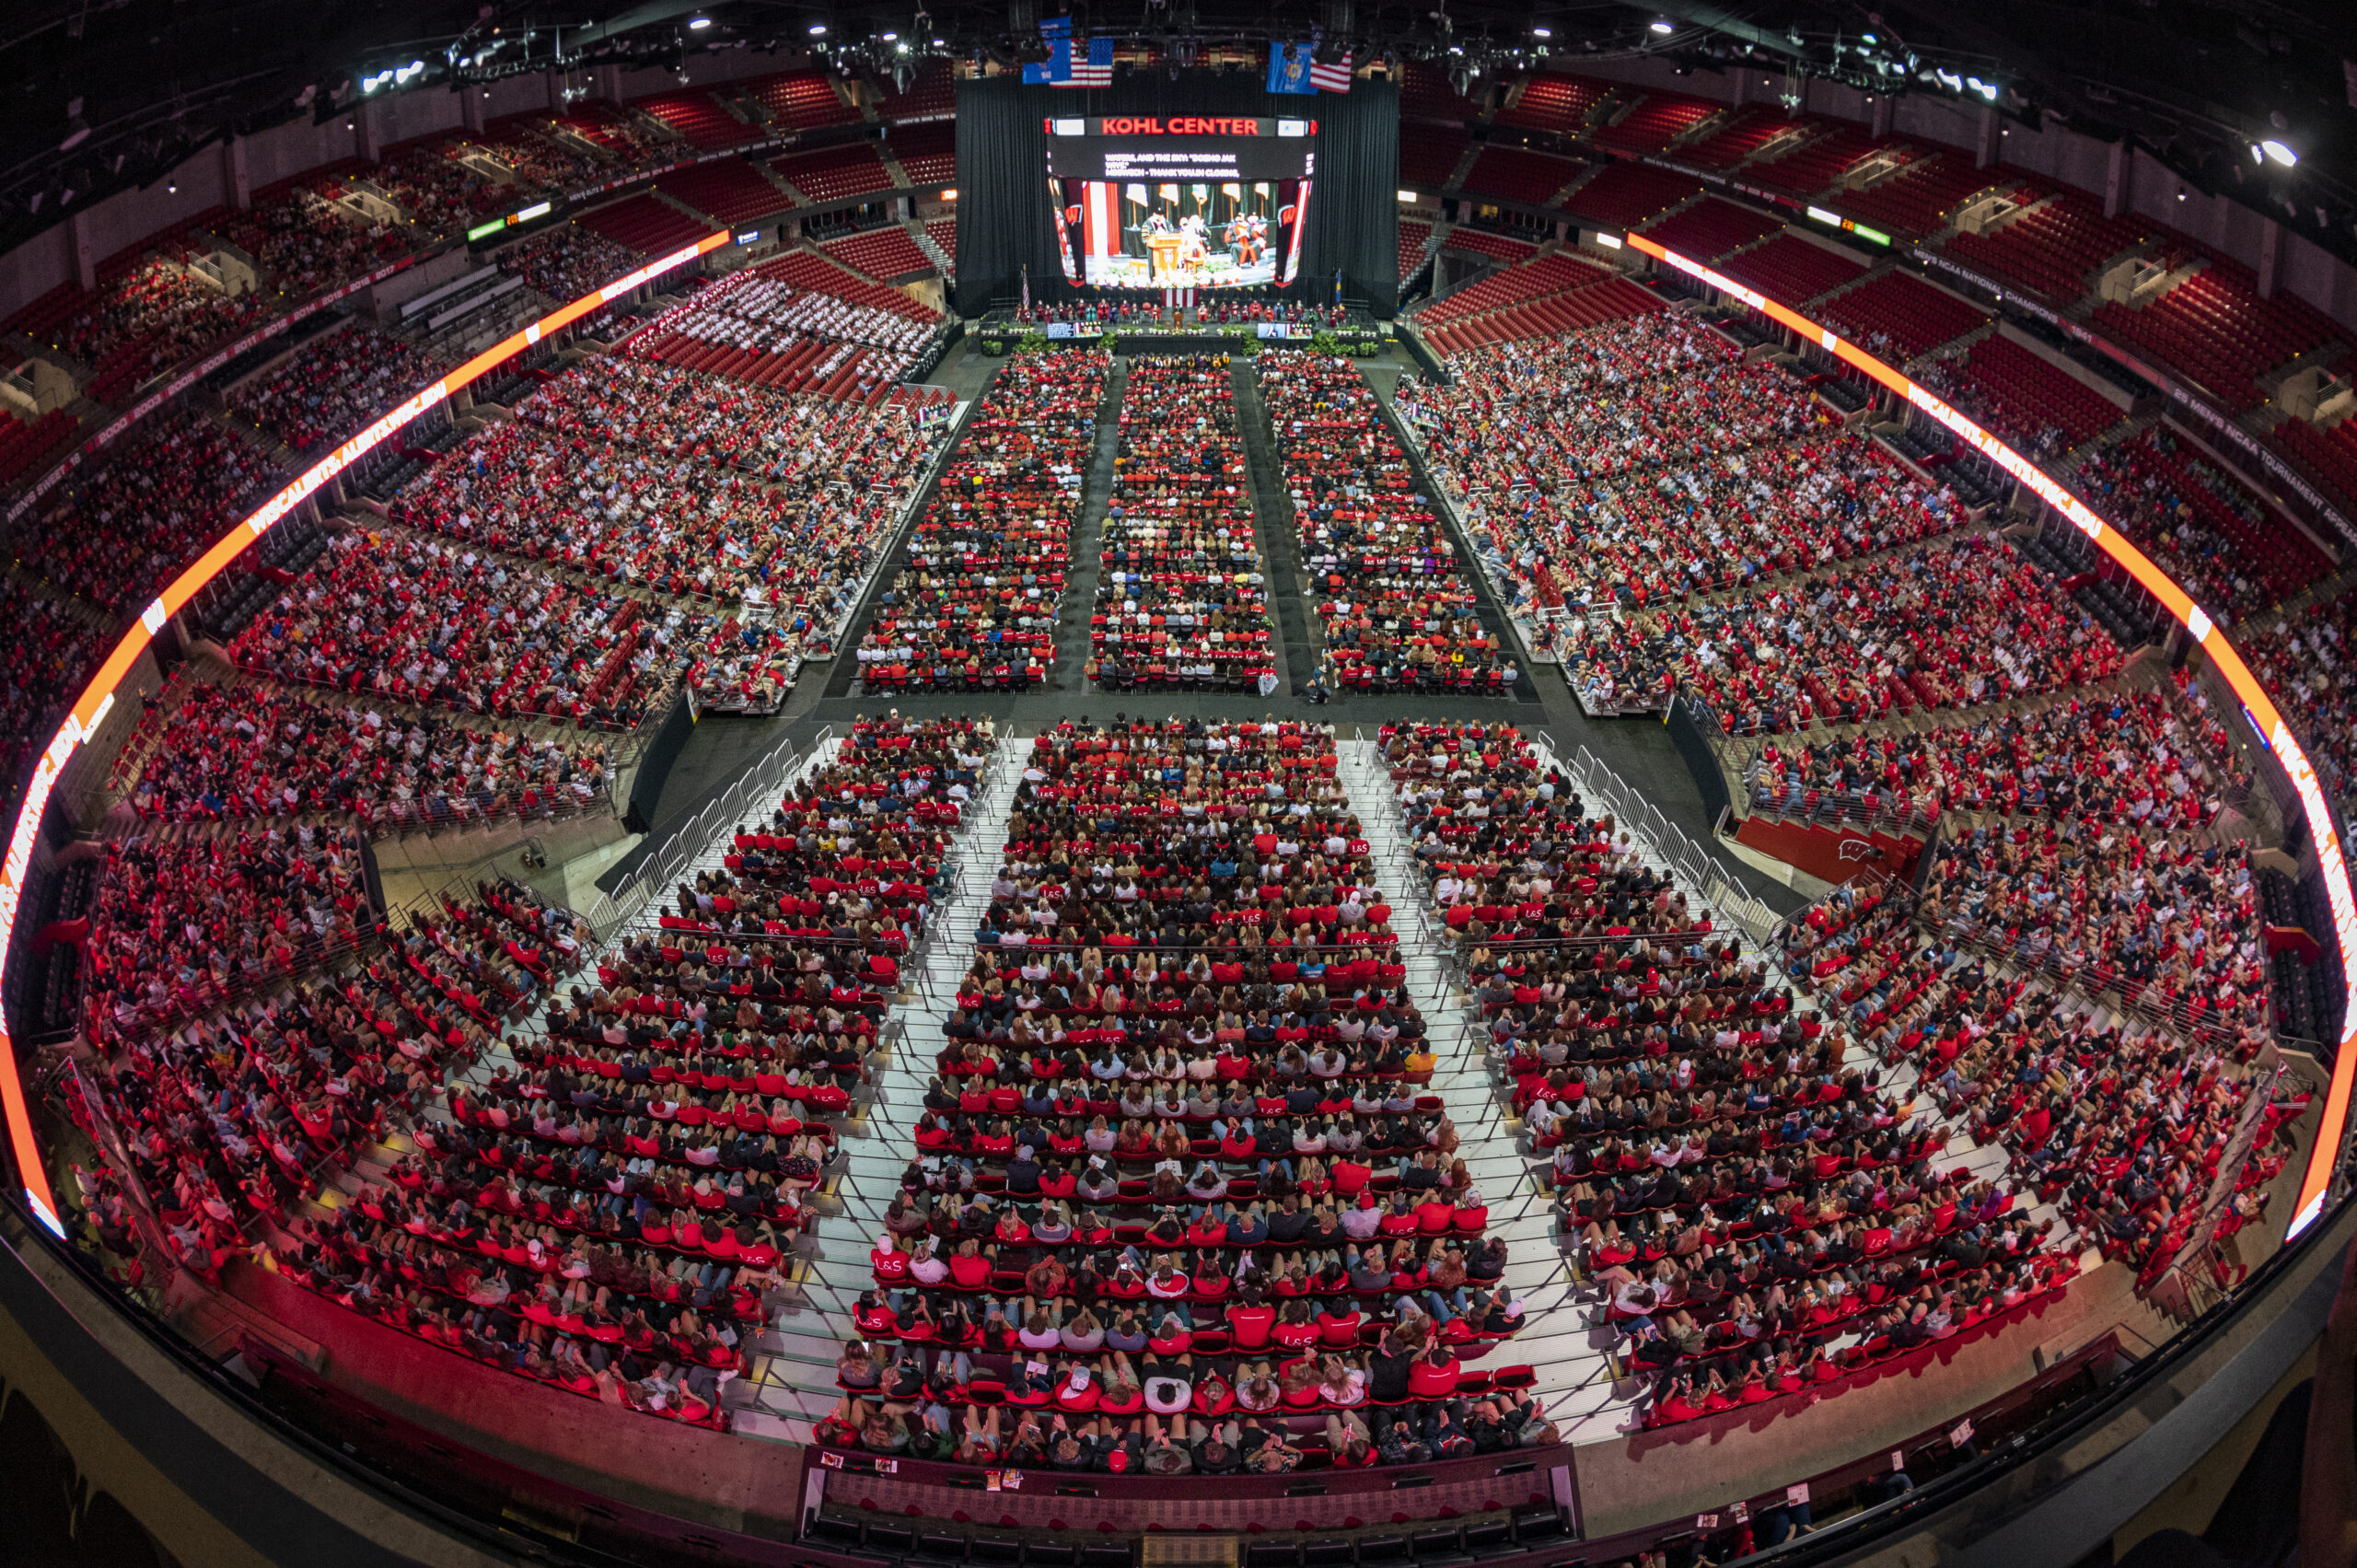 Overhead wide-angle photo of thousands of people sitting in chairs in the Kohl Center facing a stage.